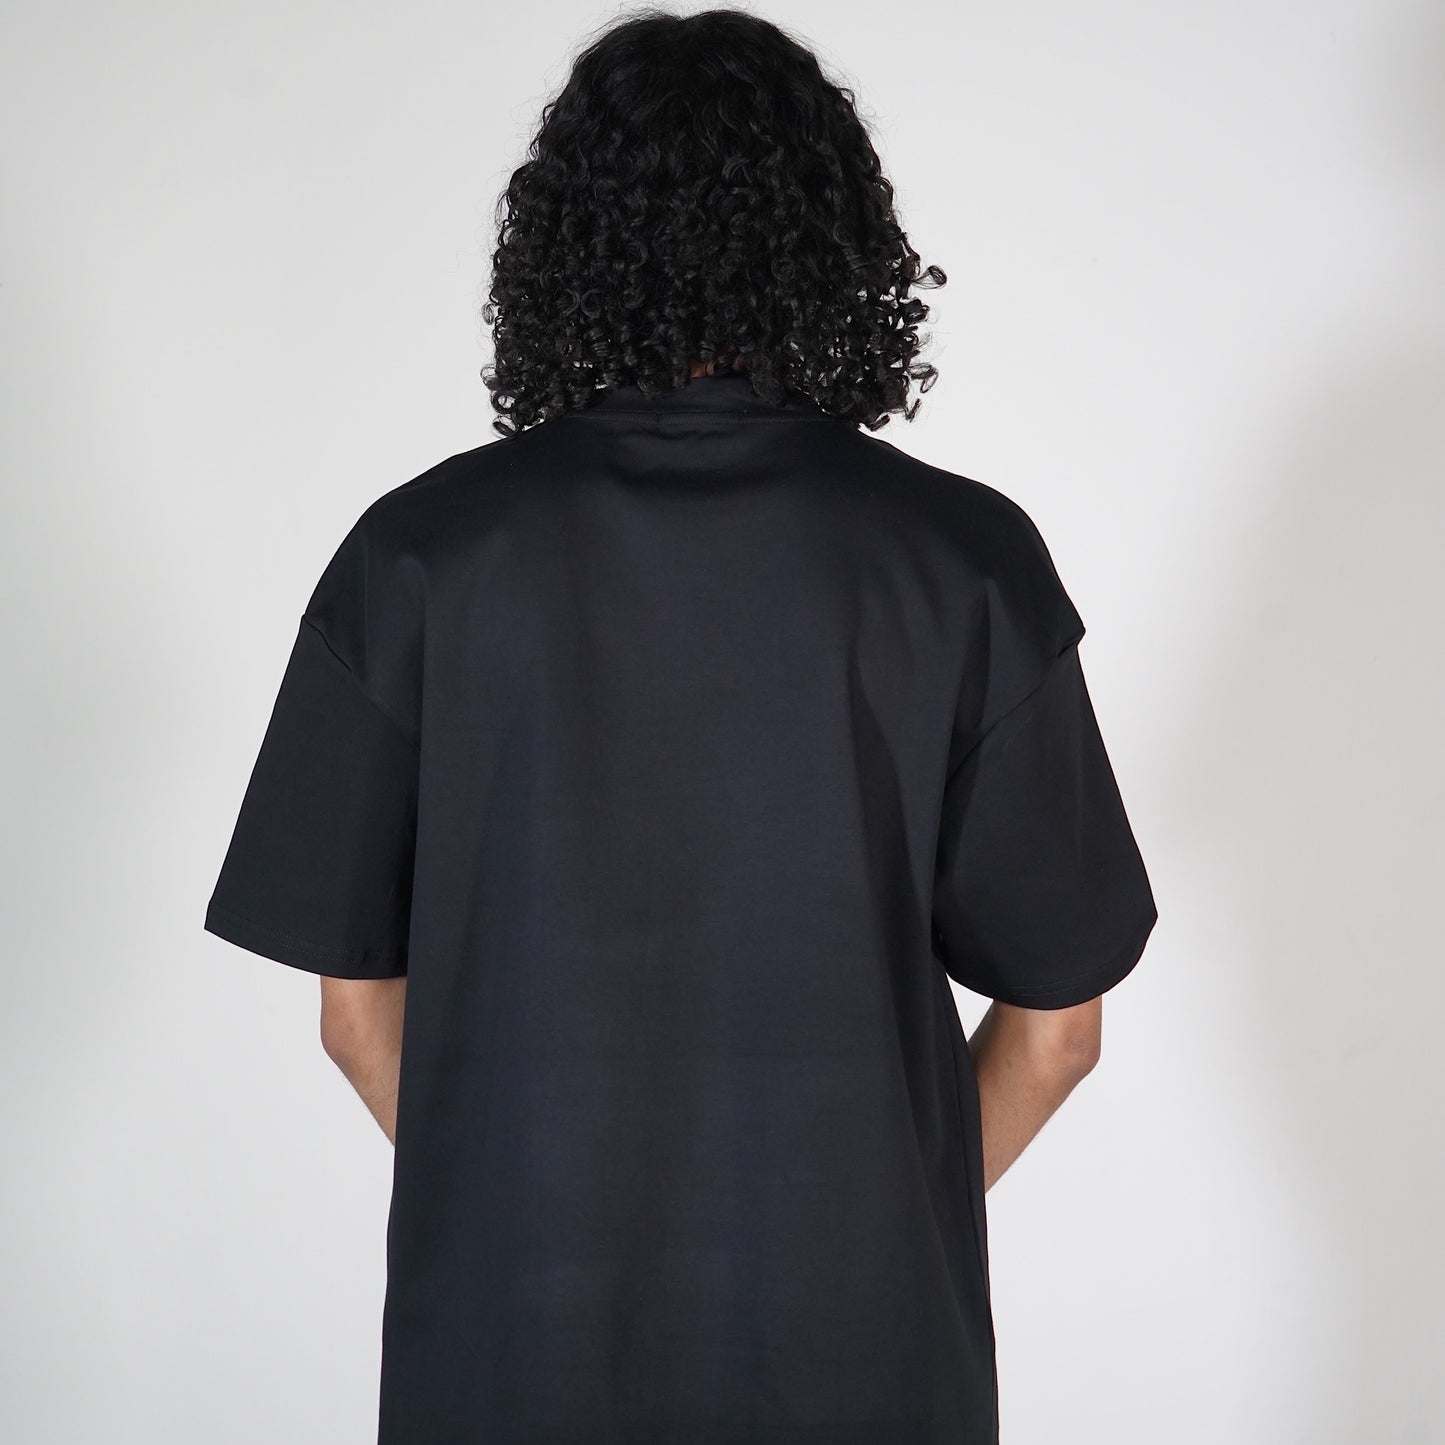 The back view of a person with curly hair wearing a plain black t-shirt.